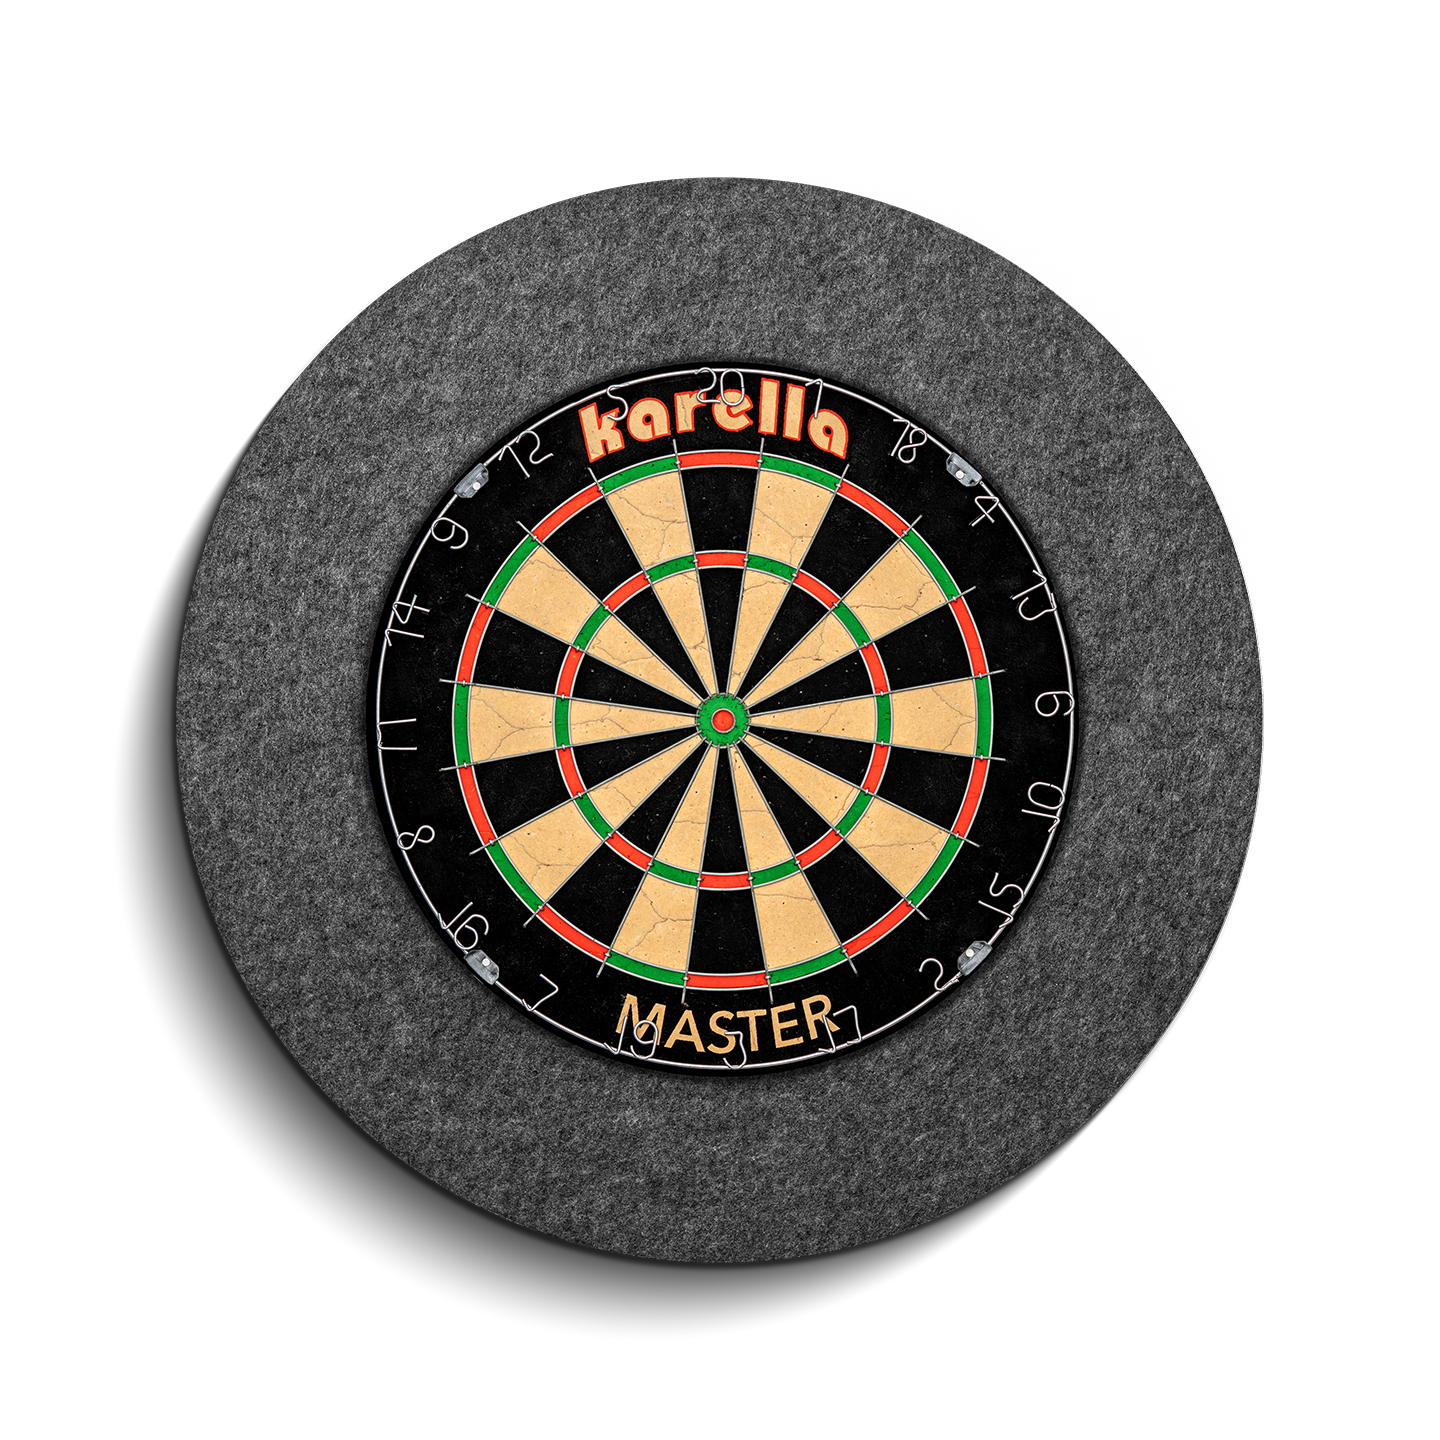 Karella sound insulation for stone dartboards with integrated surround/stop ring